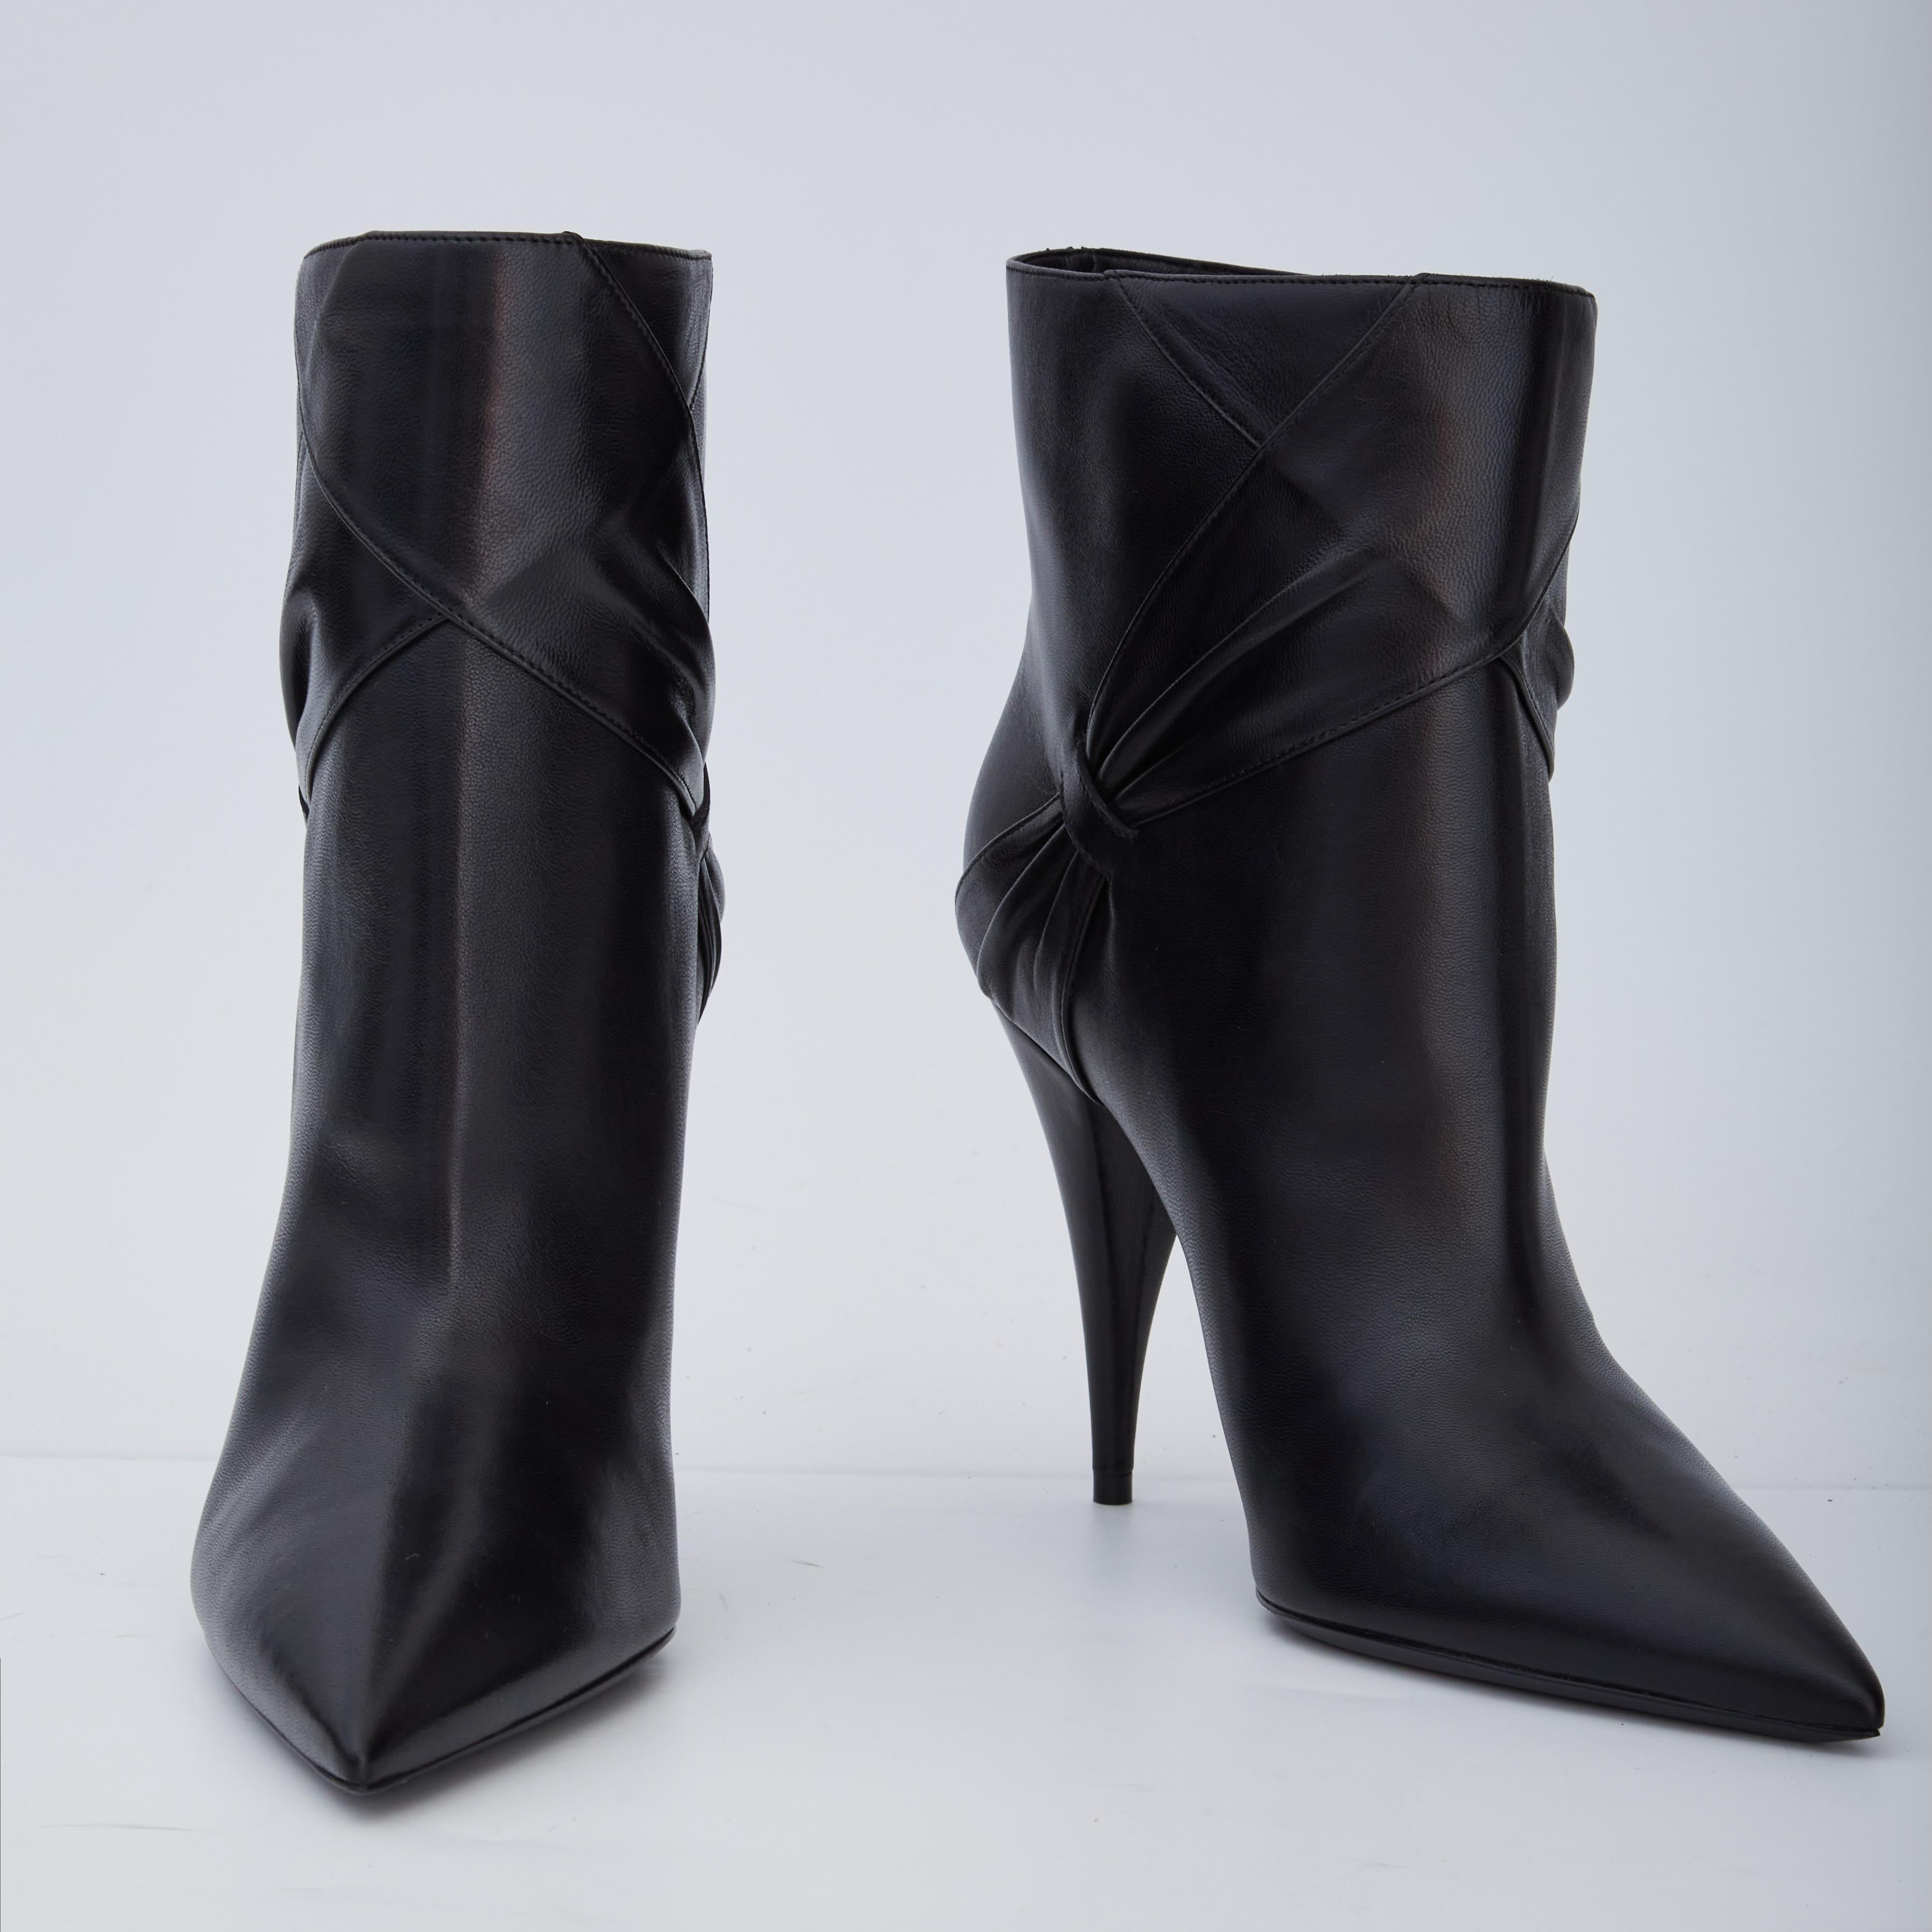 Saint Laurent Black Leather Pointed Toe Bootie 606304 (EU 39) In New Condition For Sale In Montreal, Quebec